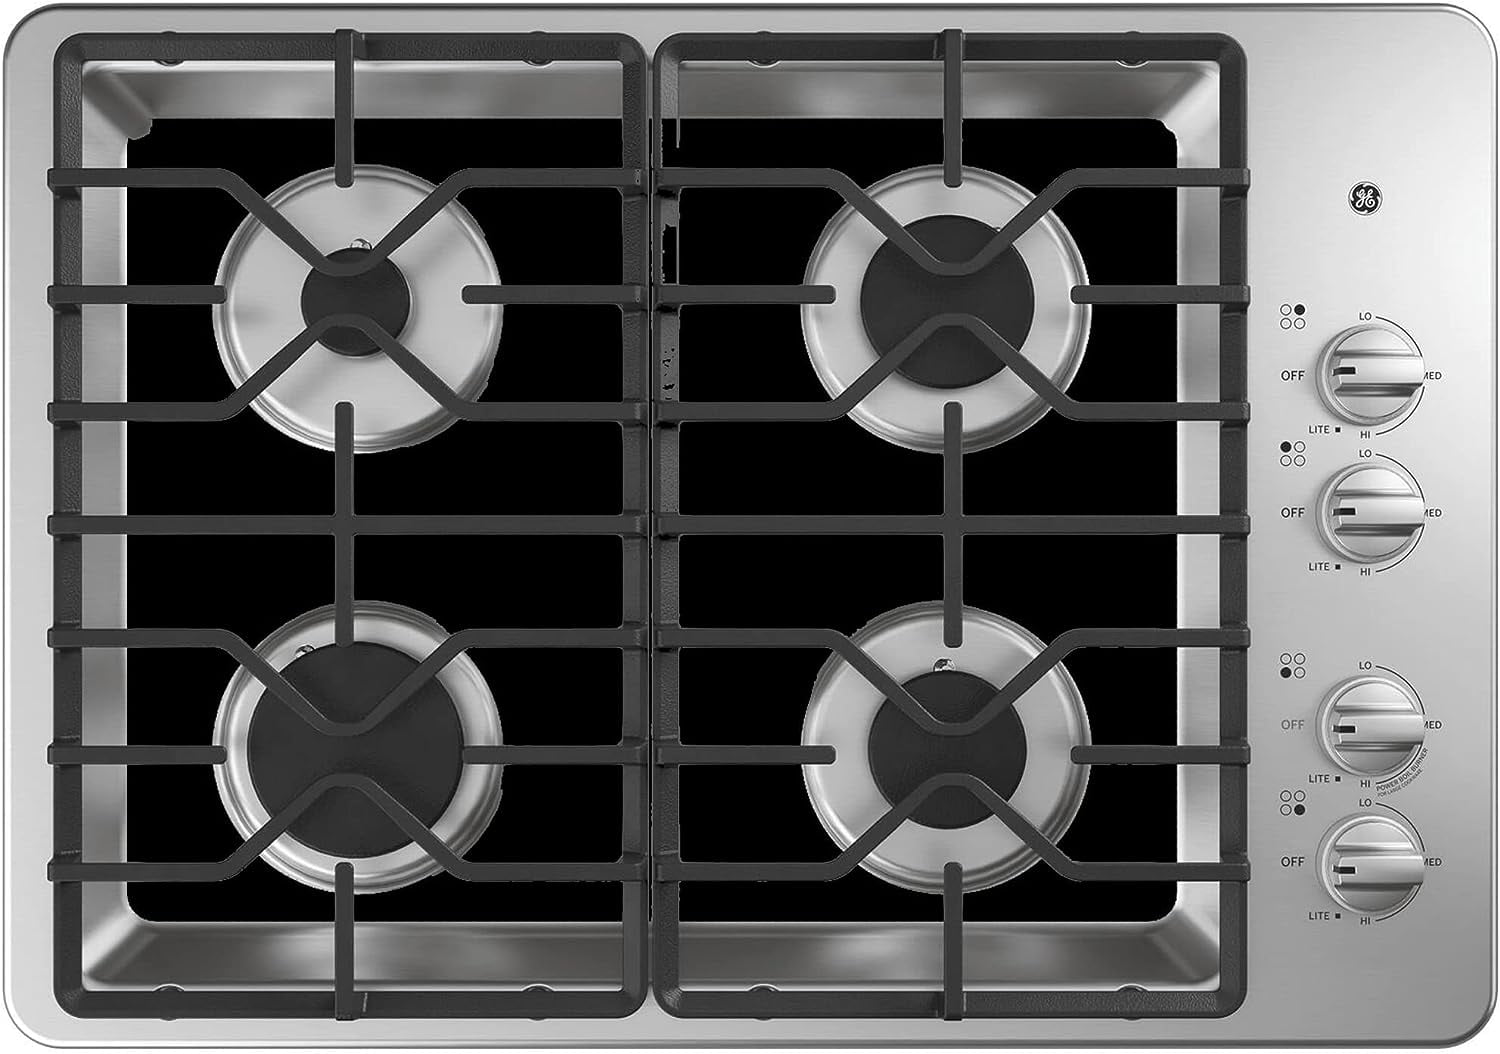 Stove Covers, Stove Protectors For Gas Range, Stove Burner Covers For Gas  Stove Top, Reusable Non-stick Washable Stove Guard, Heat Resistant  Protectors, Black - Temu Italy